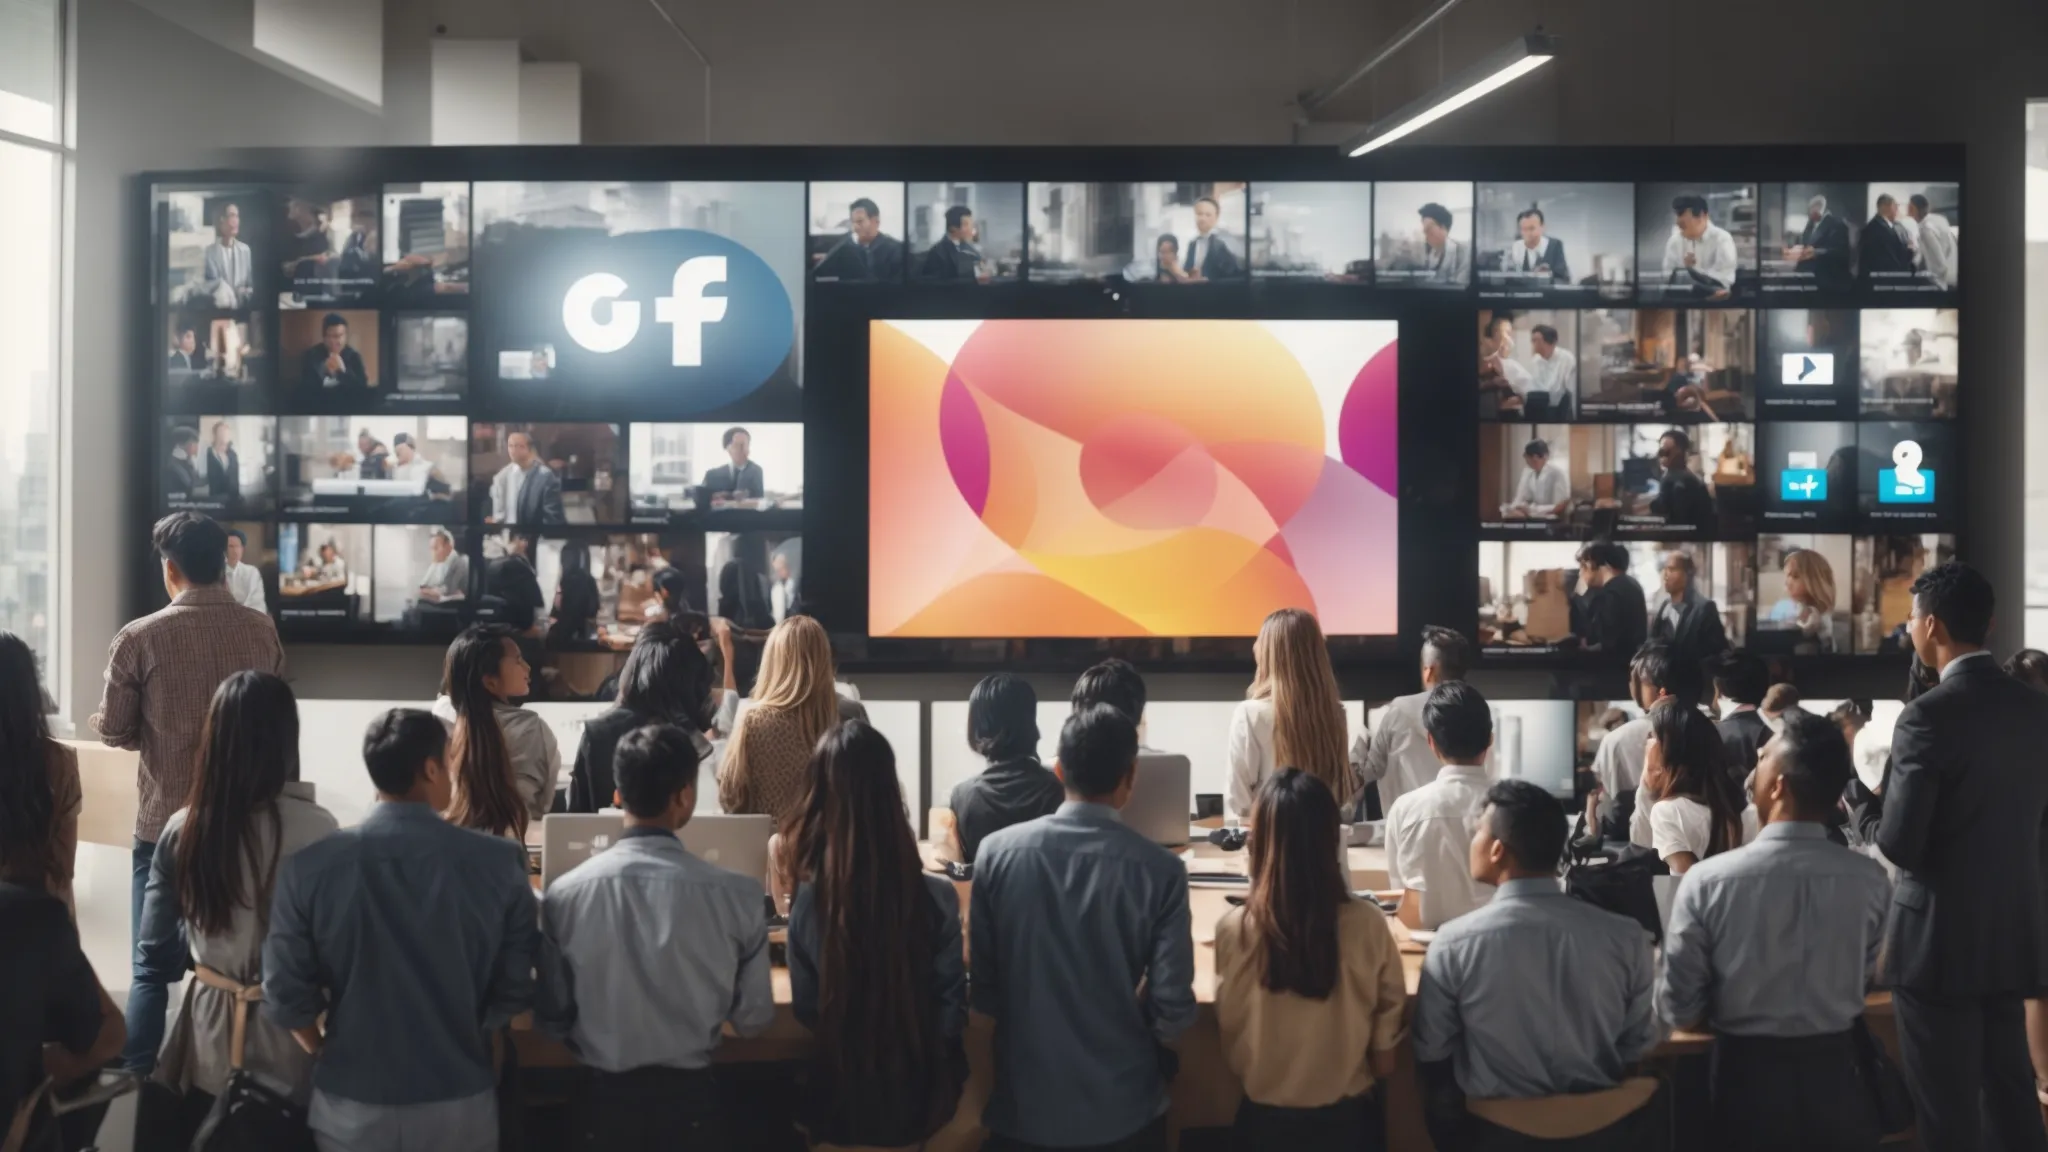 a diverse group of people gathered around a large digital screen displaying various social media icons in a bright, modern office environment.